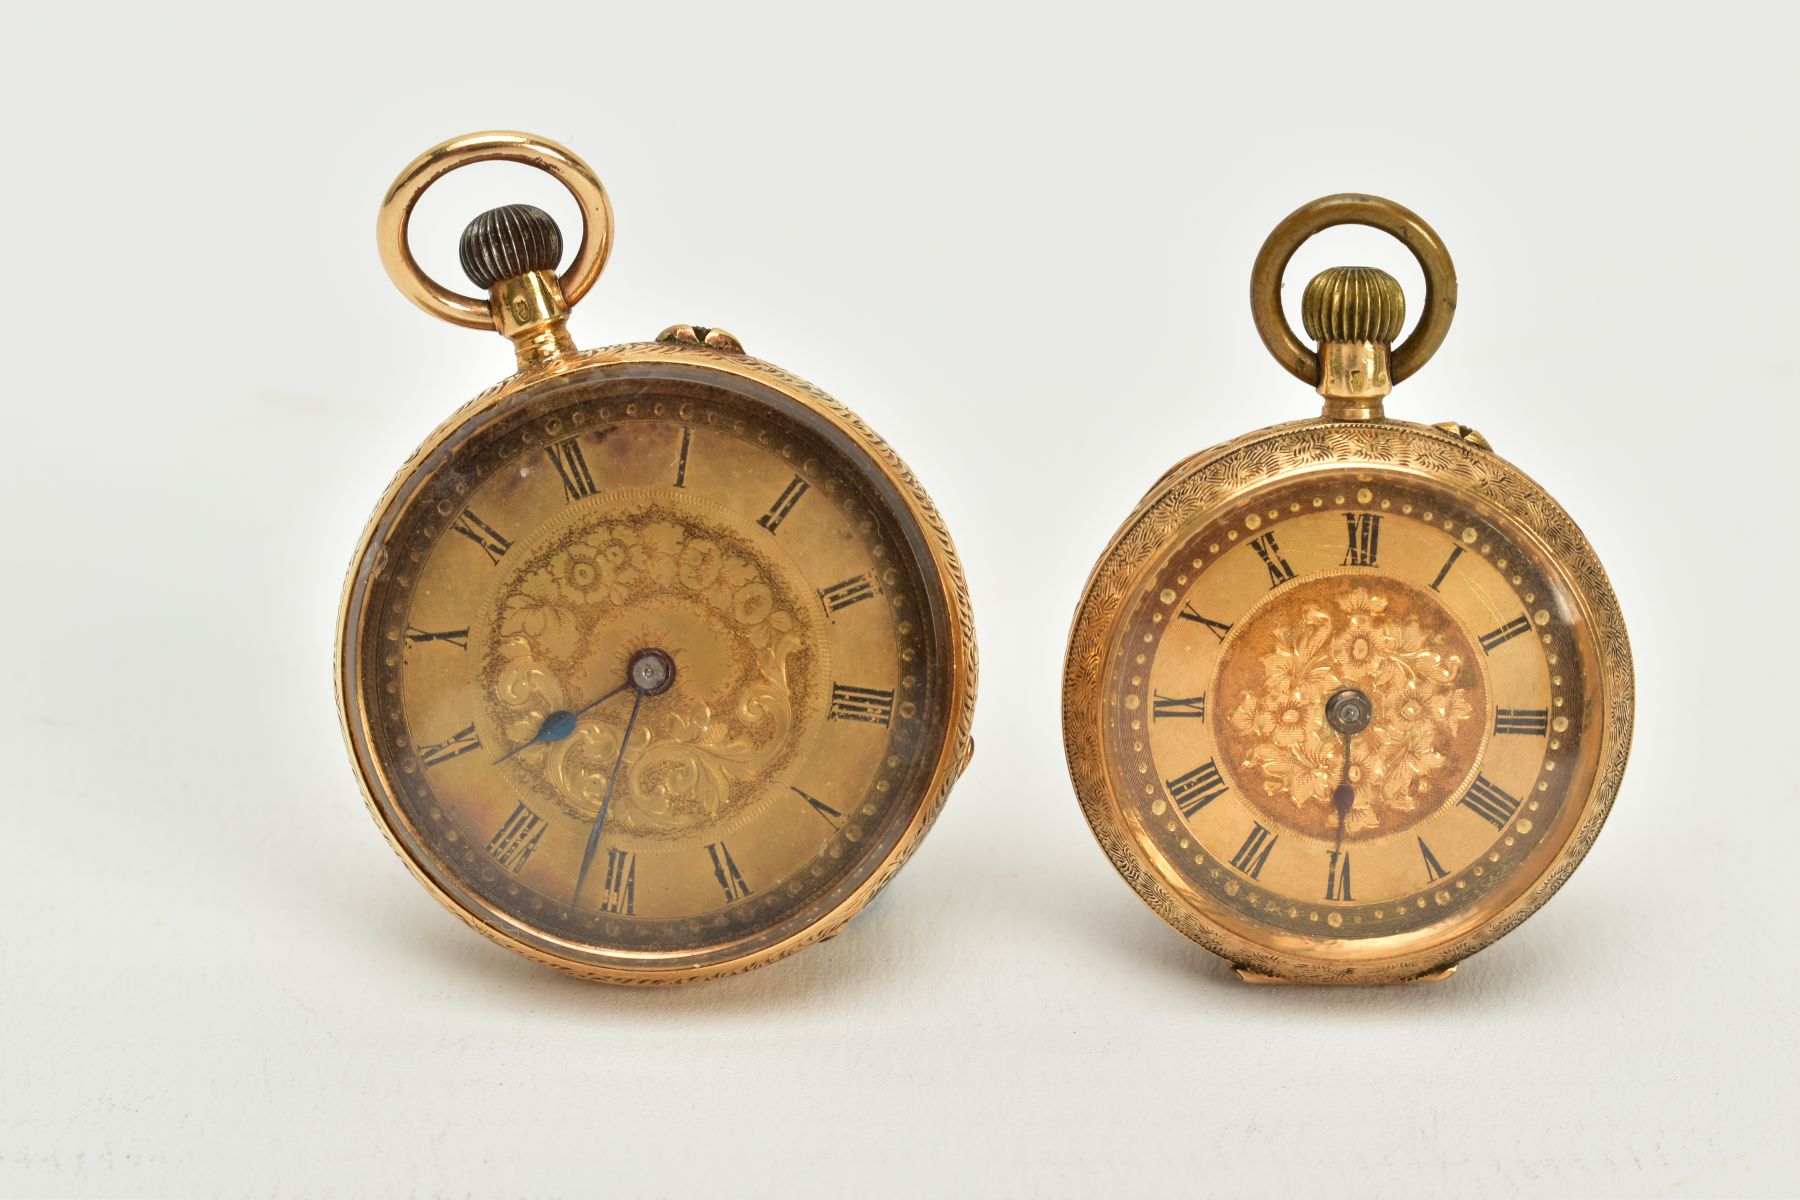 TWO OPEN FACED POCKET WATCHES, the first with a gold coloured floral detailed dial, roman